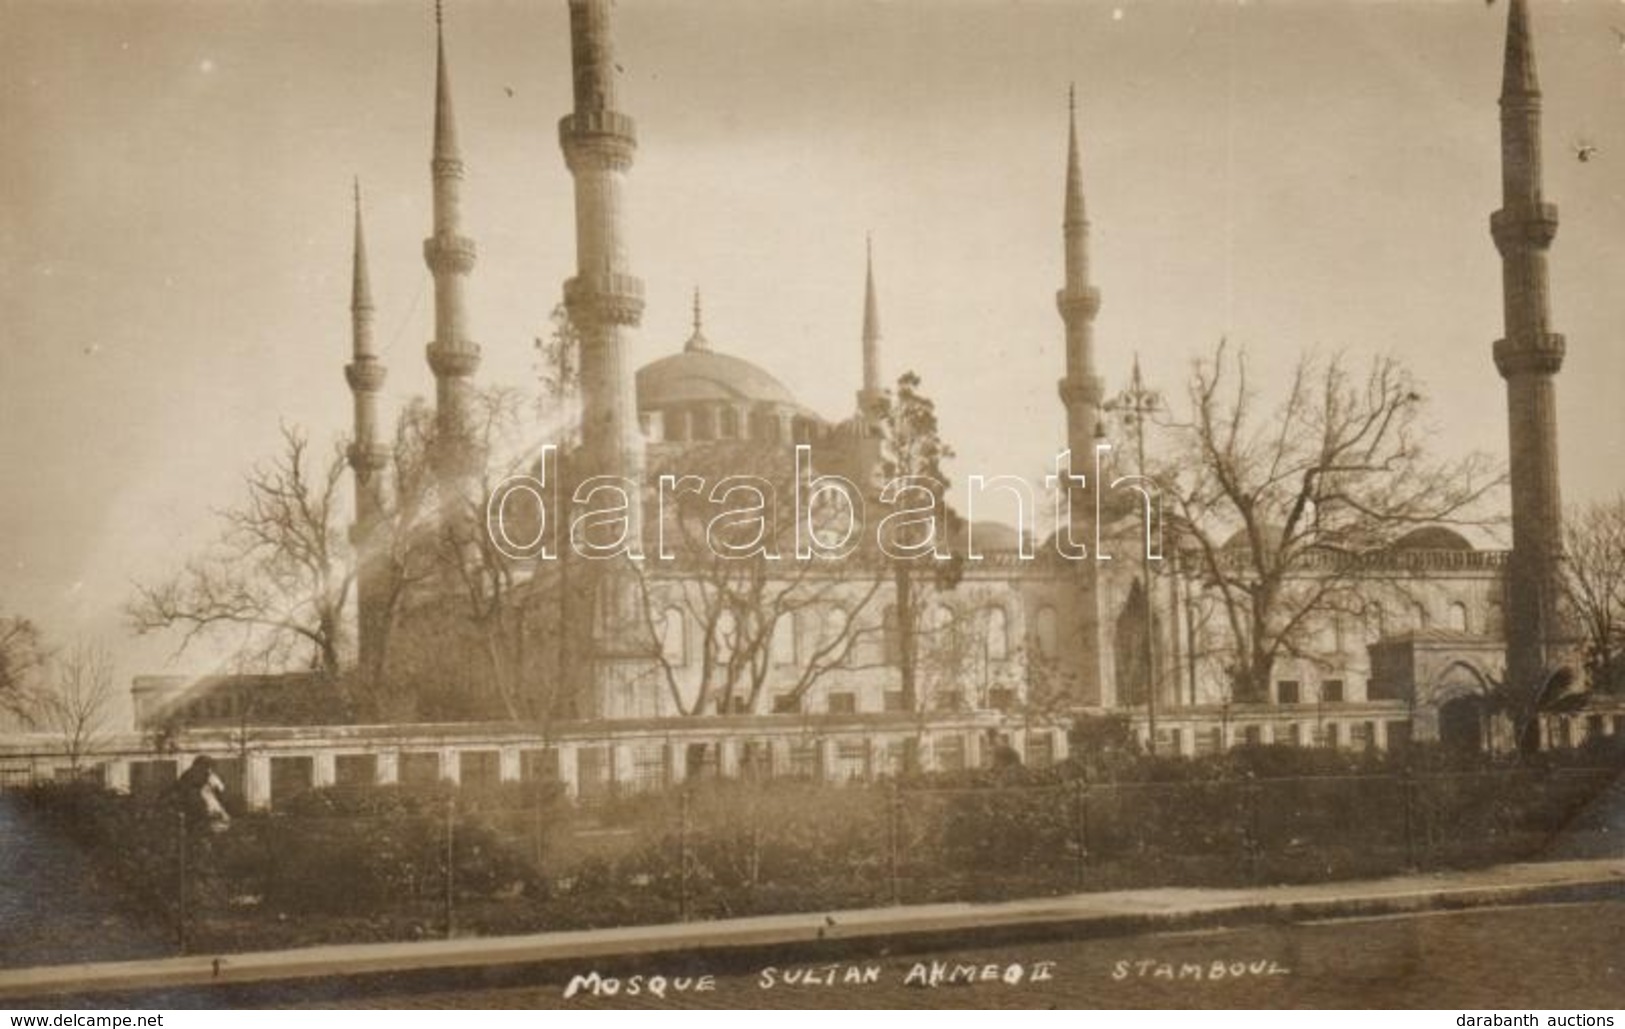 ** T3 Constantinople, Sultan Ahmed Mosque (EB) - Ohne Zuordnung